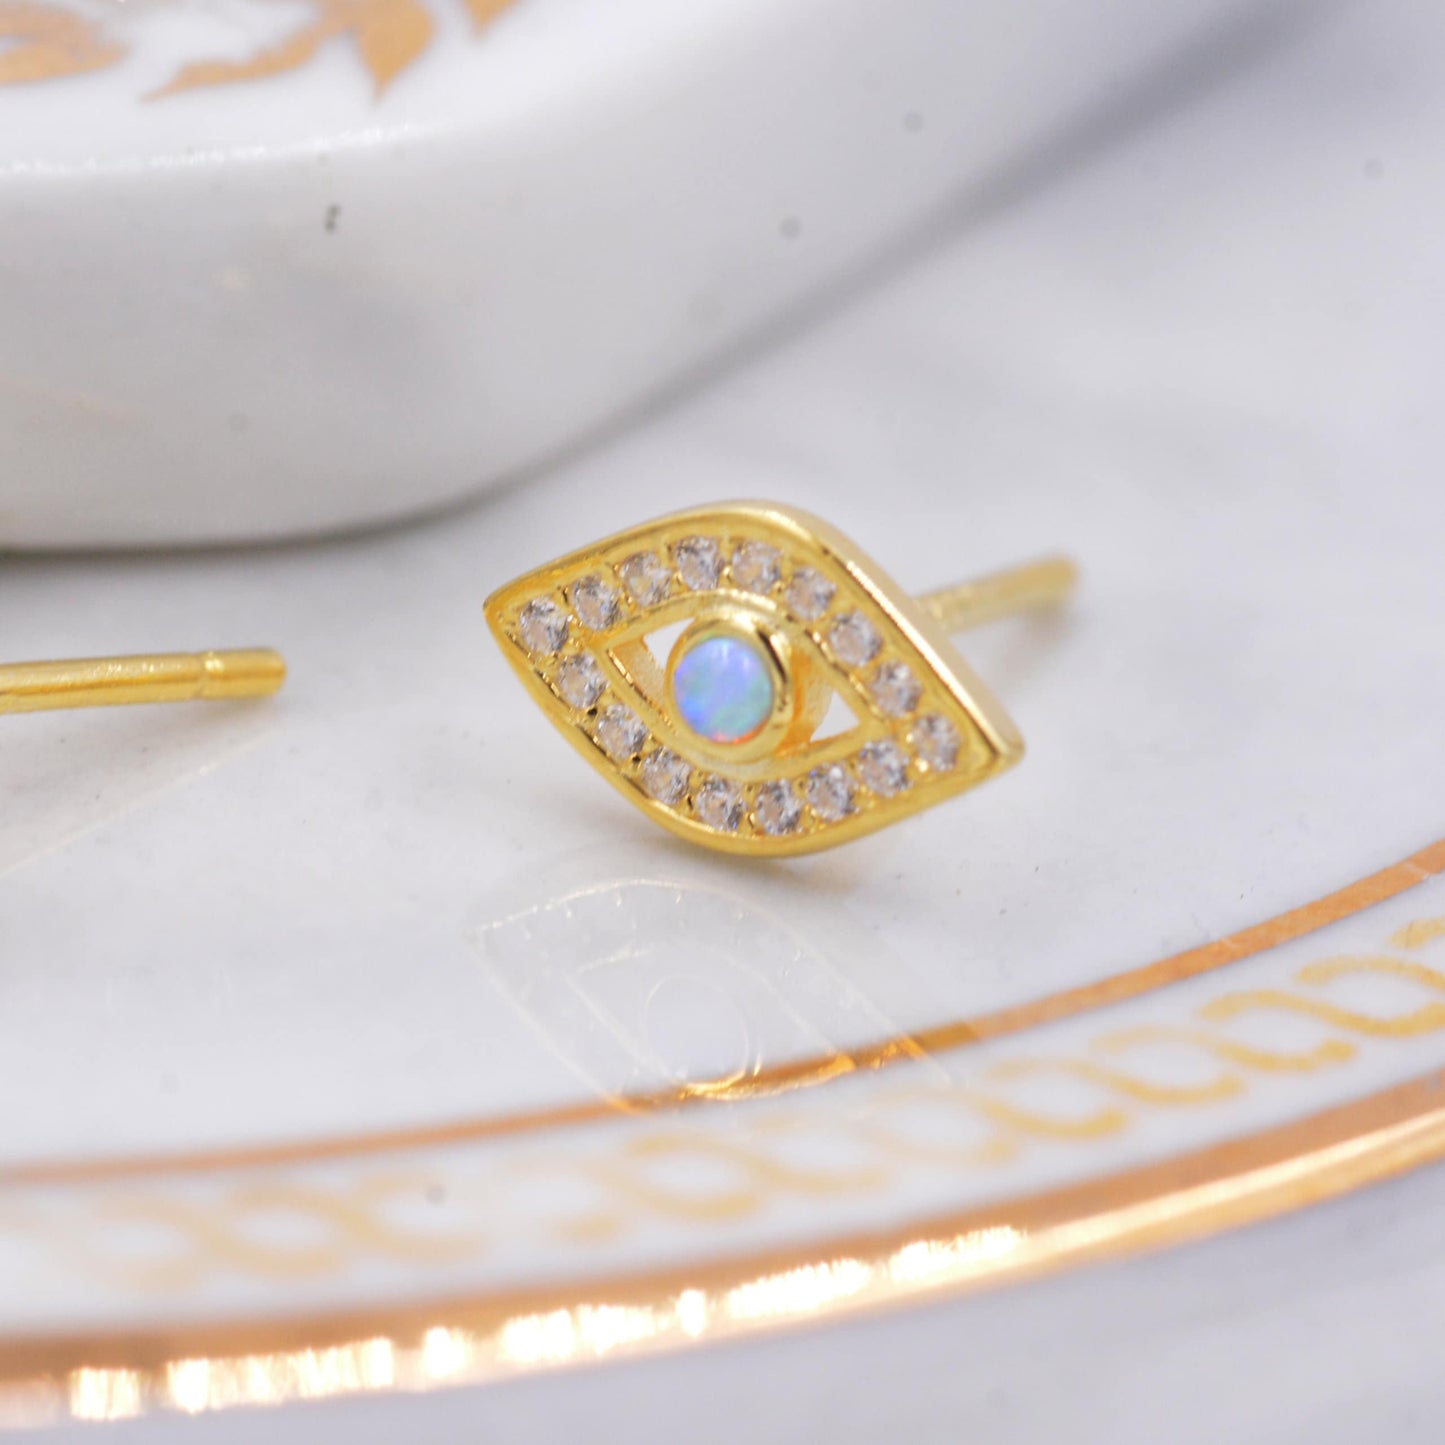 Sterling Silver Blue Opal Evil Eye Stud Earrings, Gold and Silver, Cute and Quirky Jewellery